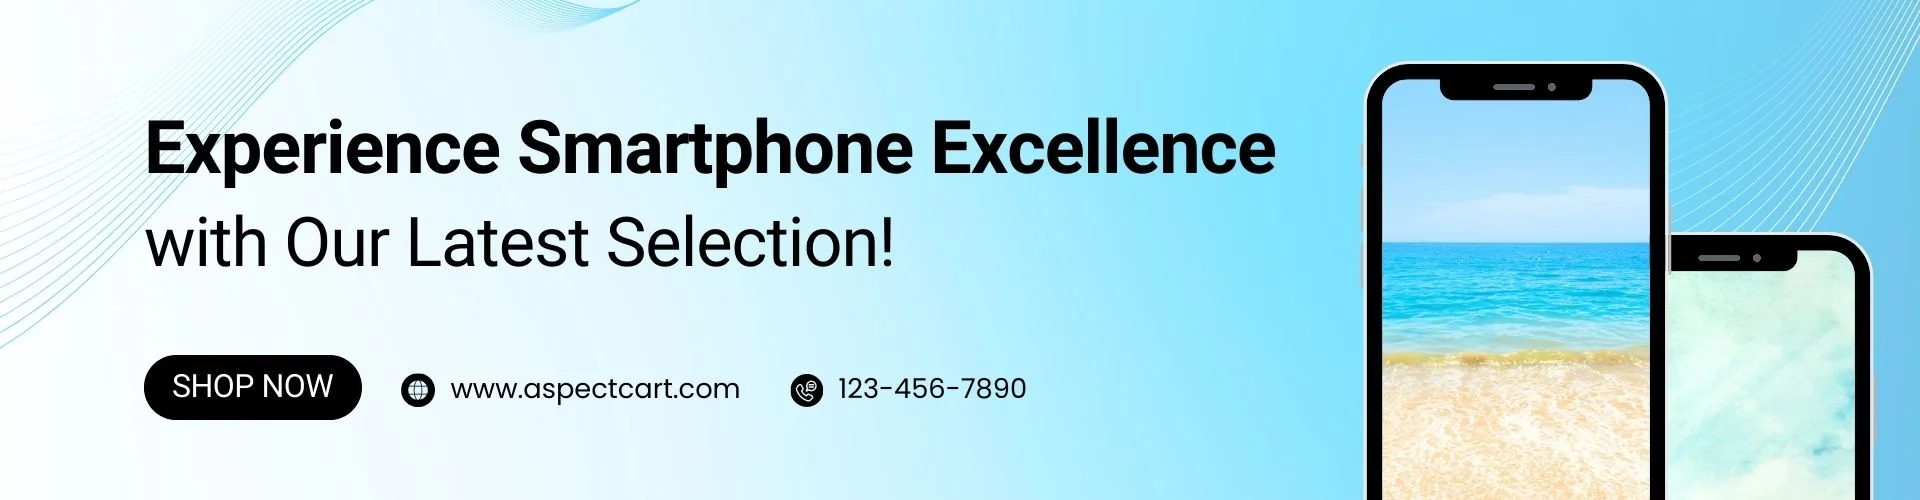 Banner showcasing the latest collection of smartphones at a mobile phone electronics store